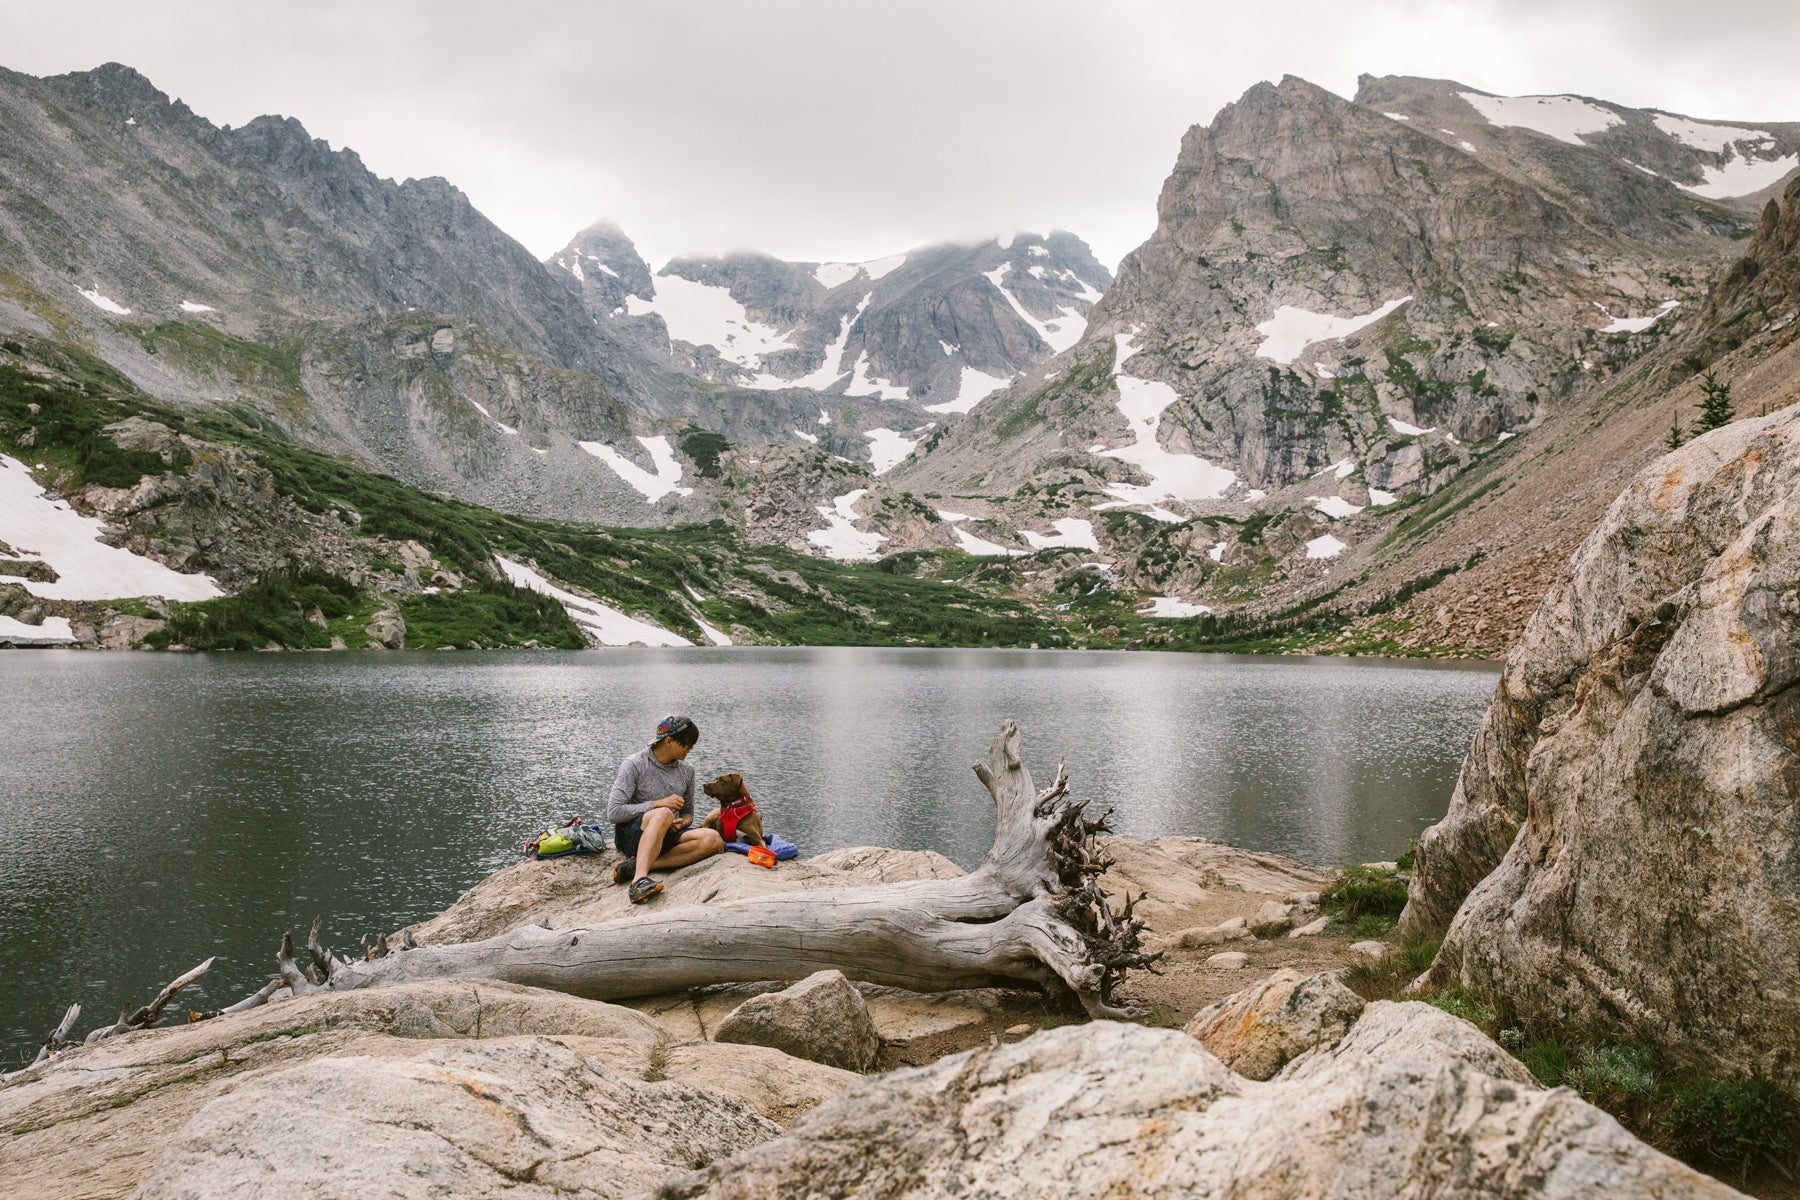 Nathan and Turkey sit on a rock by an alpine lake for a snack break.